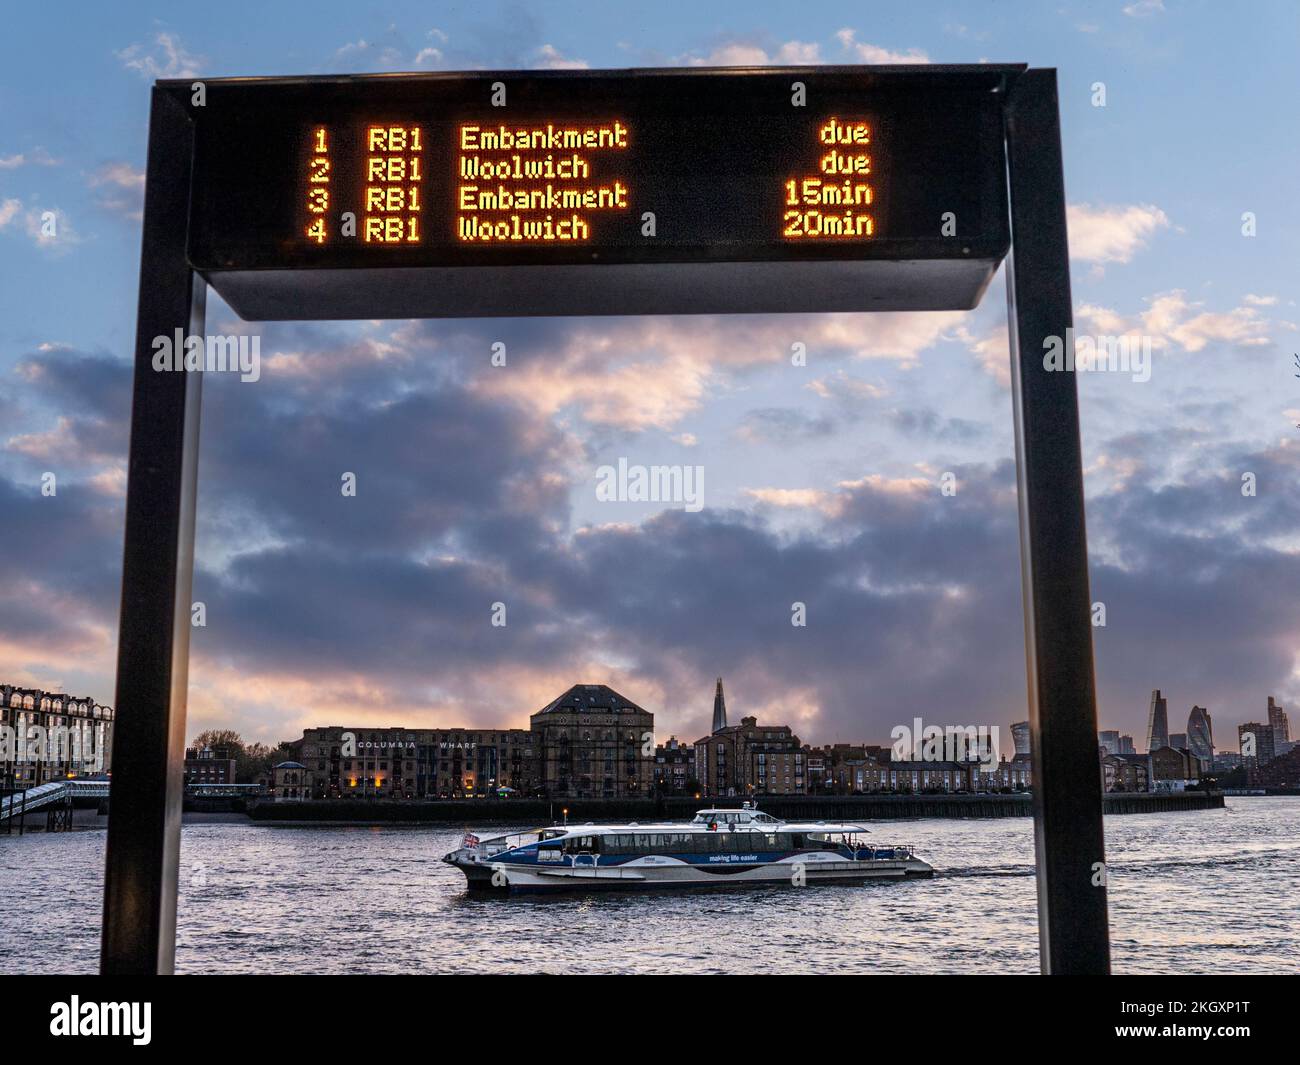 CANARY WHARF CLIPPER RIVER BOAT RB1 Digital Arrivals Information Screen und RB1 Thames Clipper River Boat Arrival at Sunset Arrival in Canary Wharf London UK mit City of London einschließlich The Shard Behind. Stockfoto